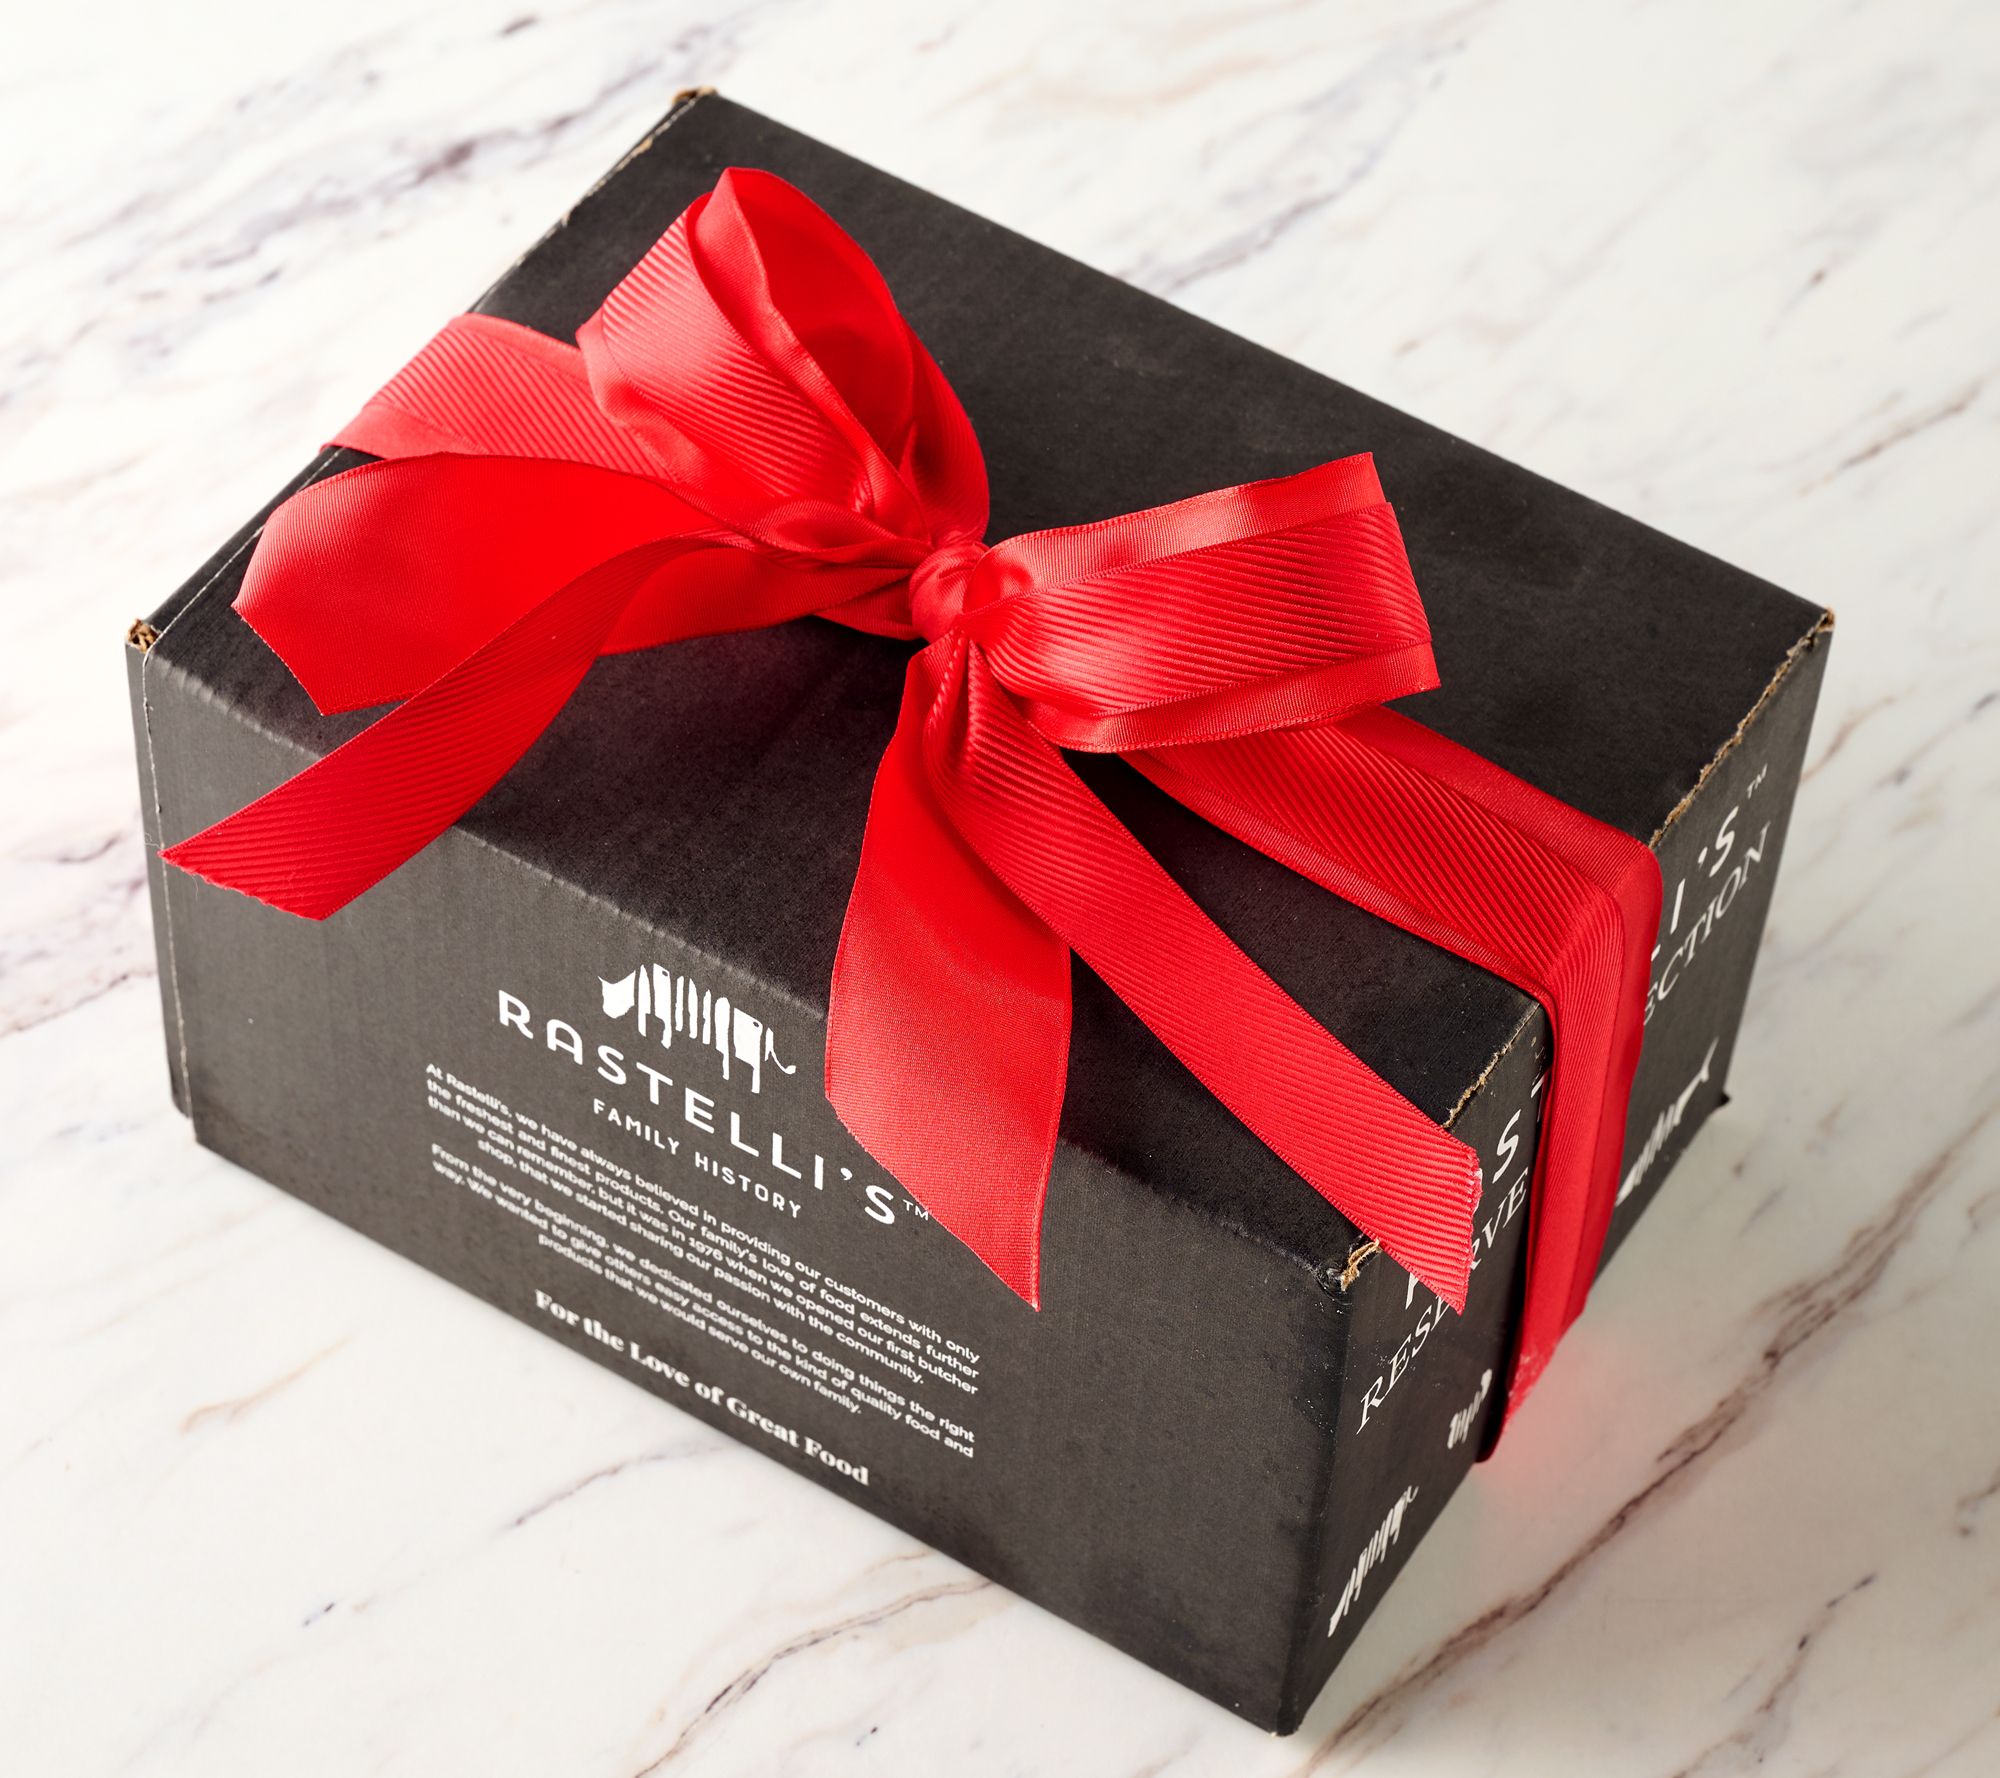 Rastelli's 5 Piece Ultimate Steak Lovers Gift Box Auto-Delivery